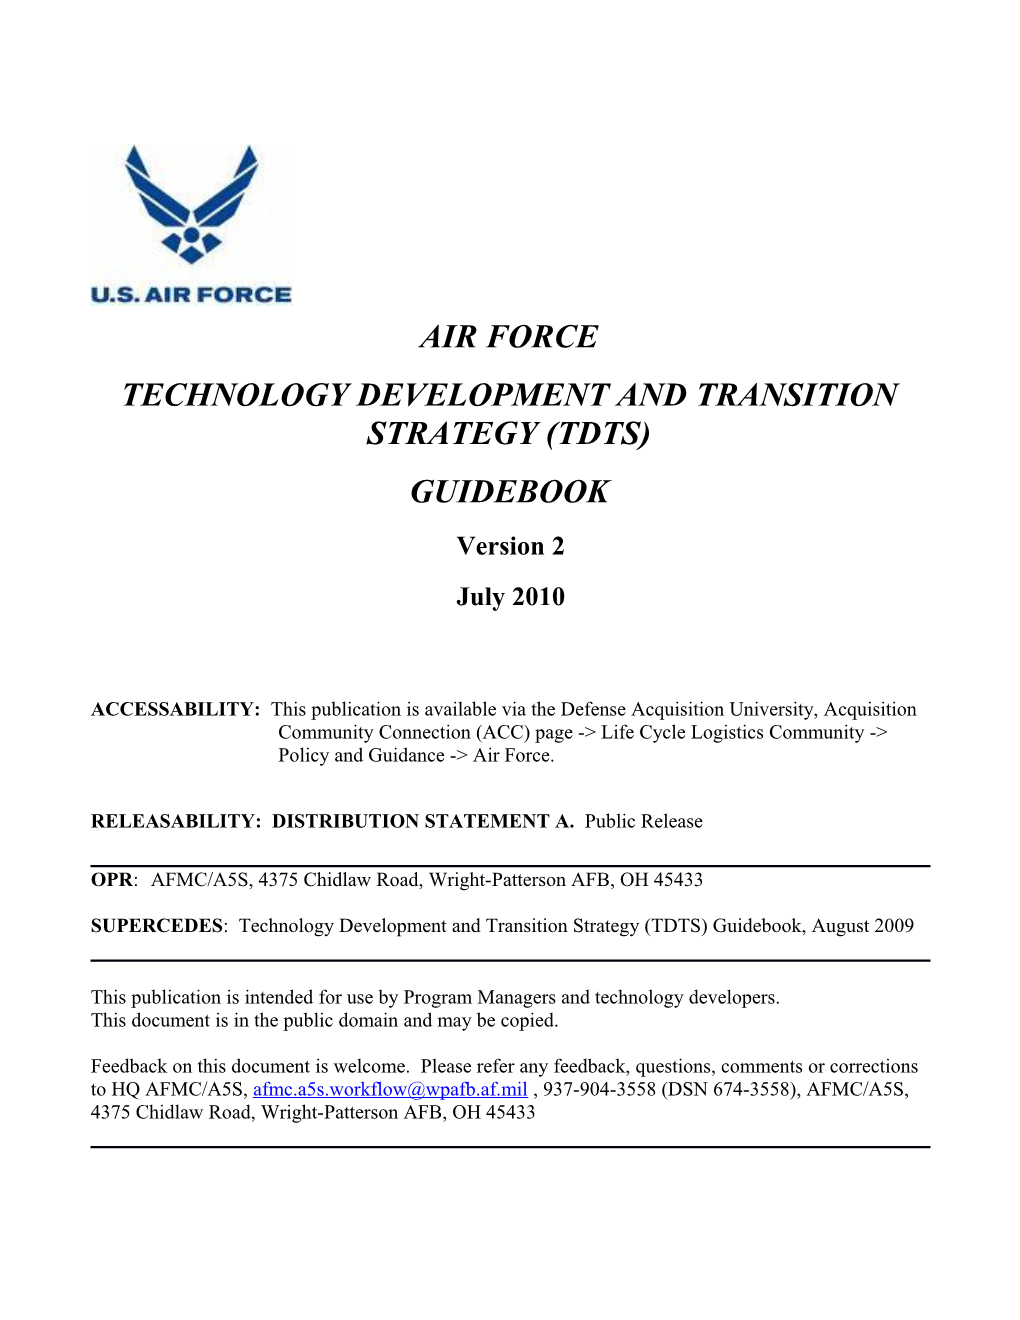 USAF Technology Development and Transition Strategy TDTS Guidebook, 2010